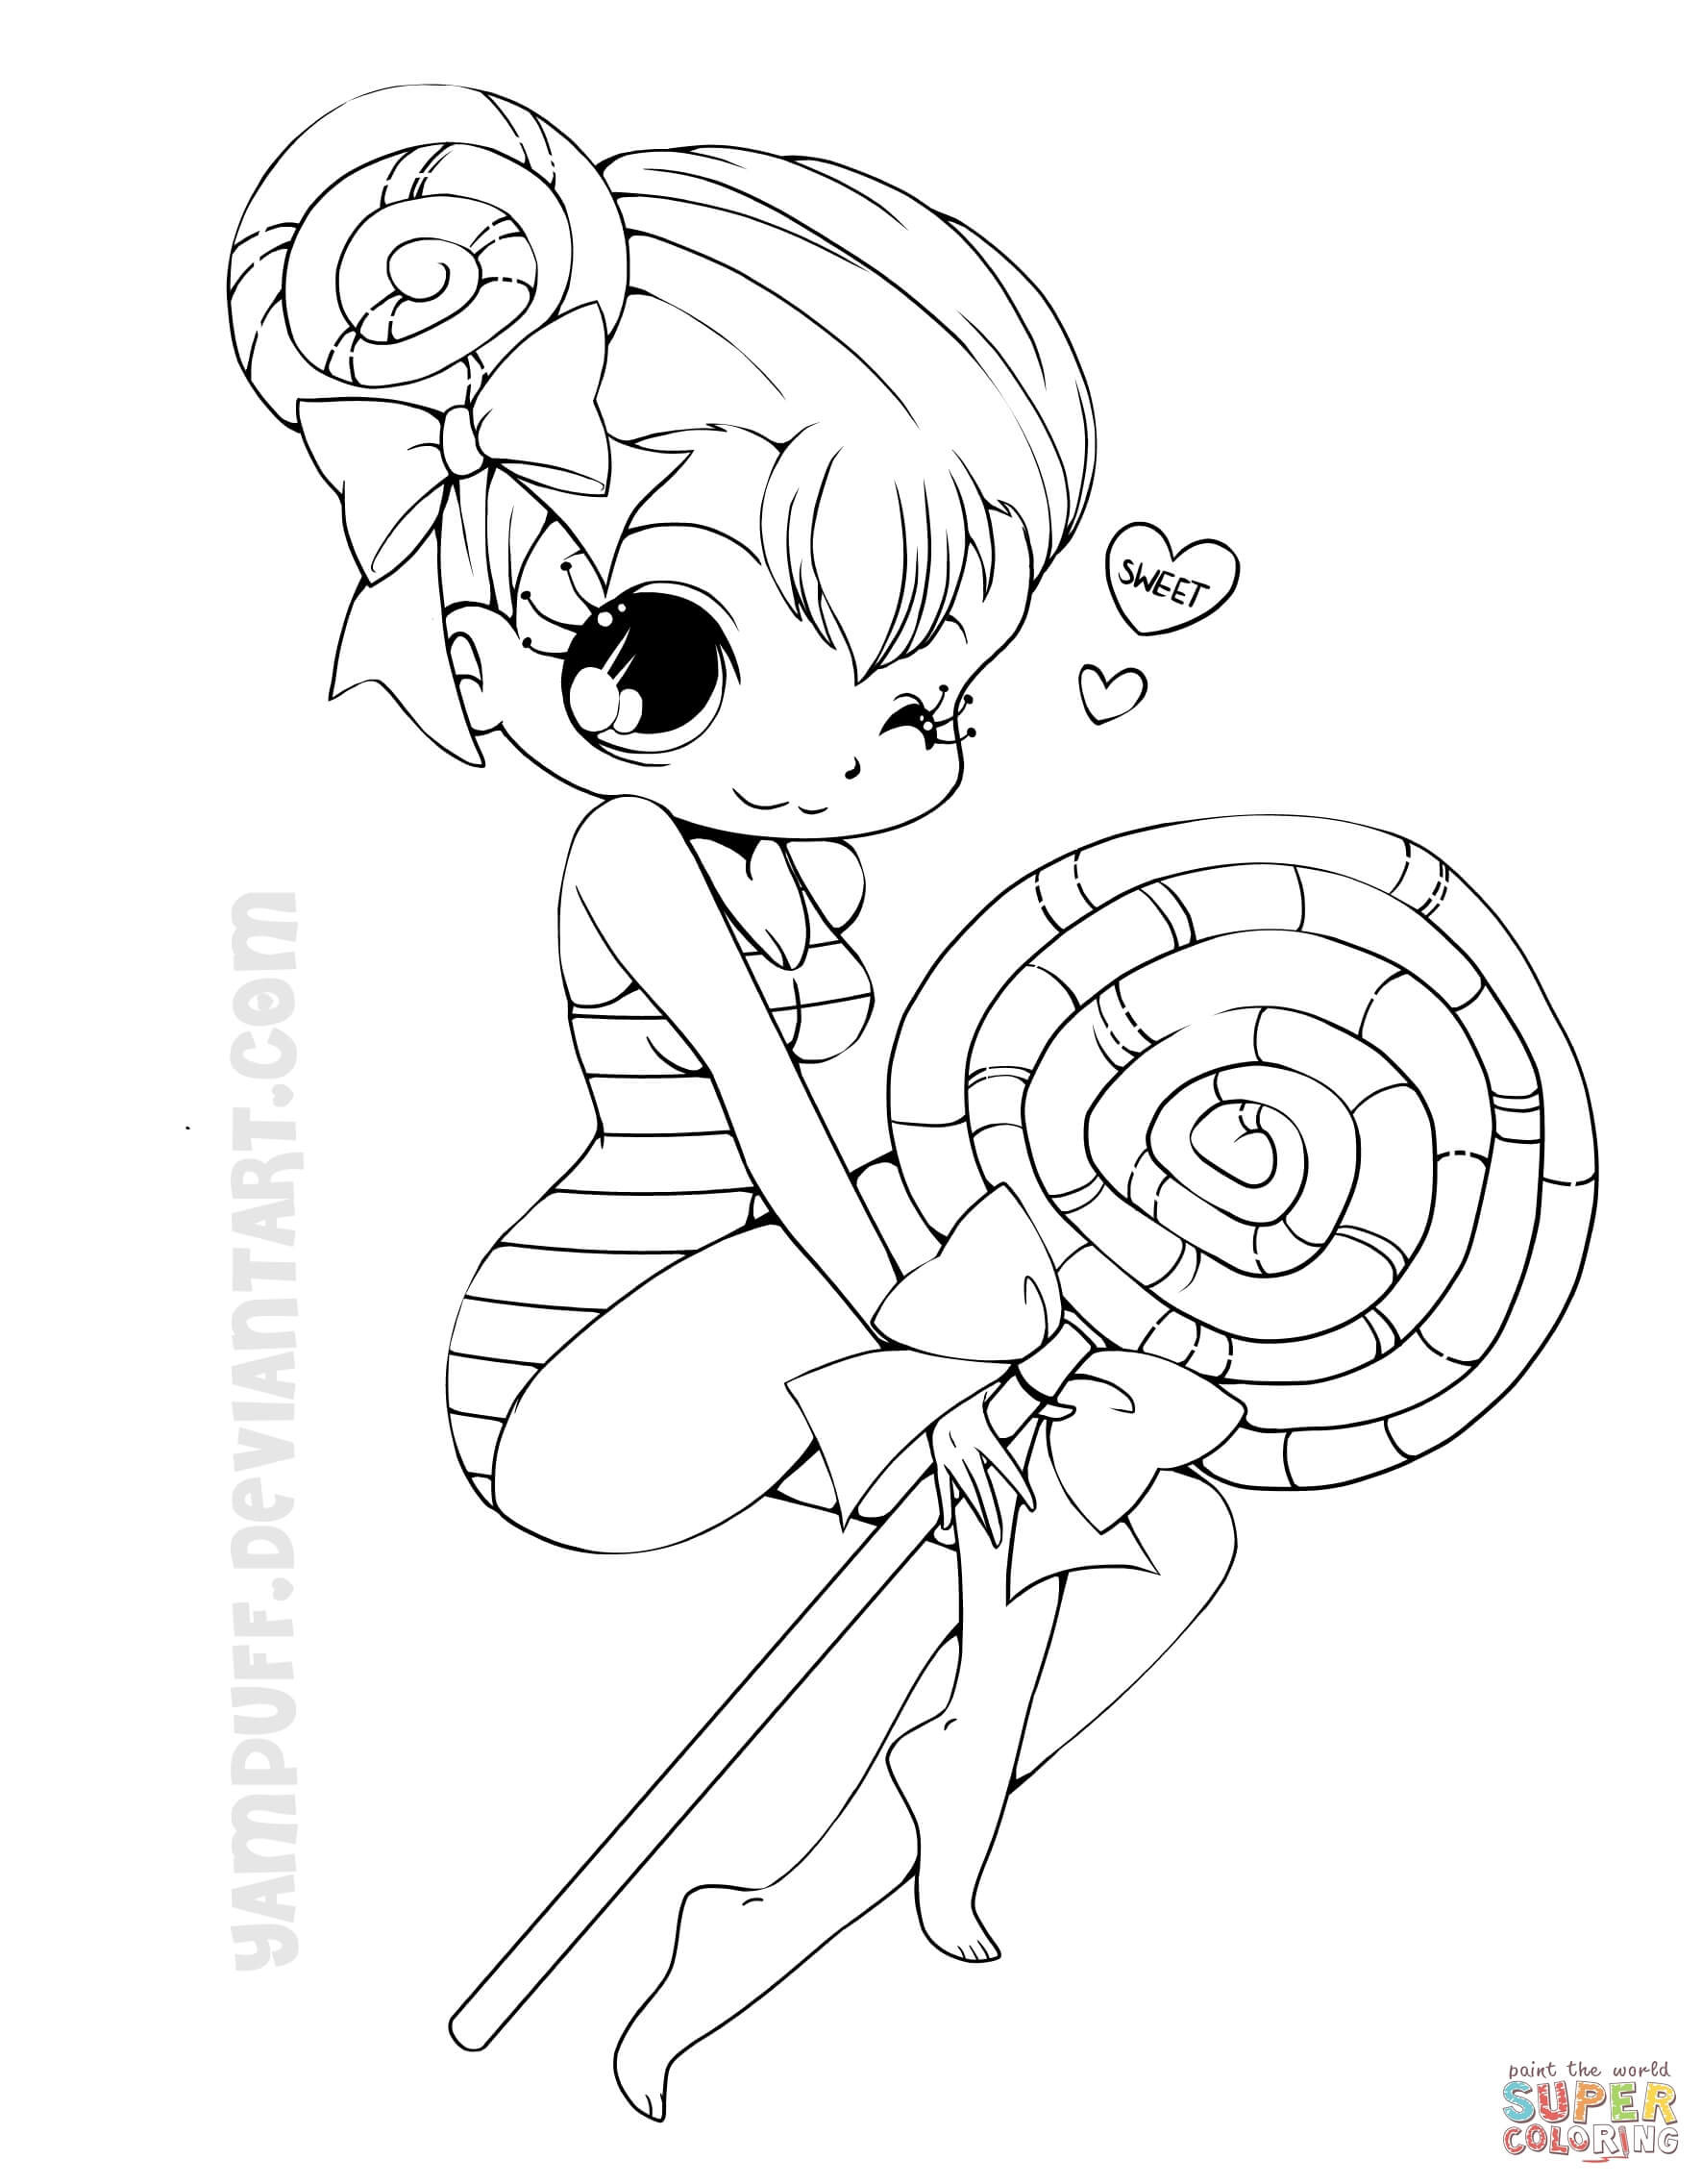 Chibi Girls Coloring Pages
 Chibi Lollipop Girl coloring page